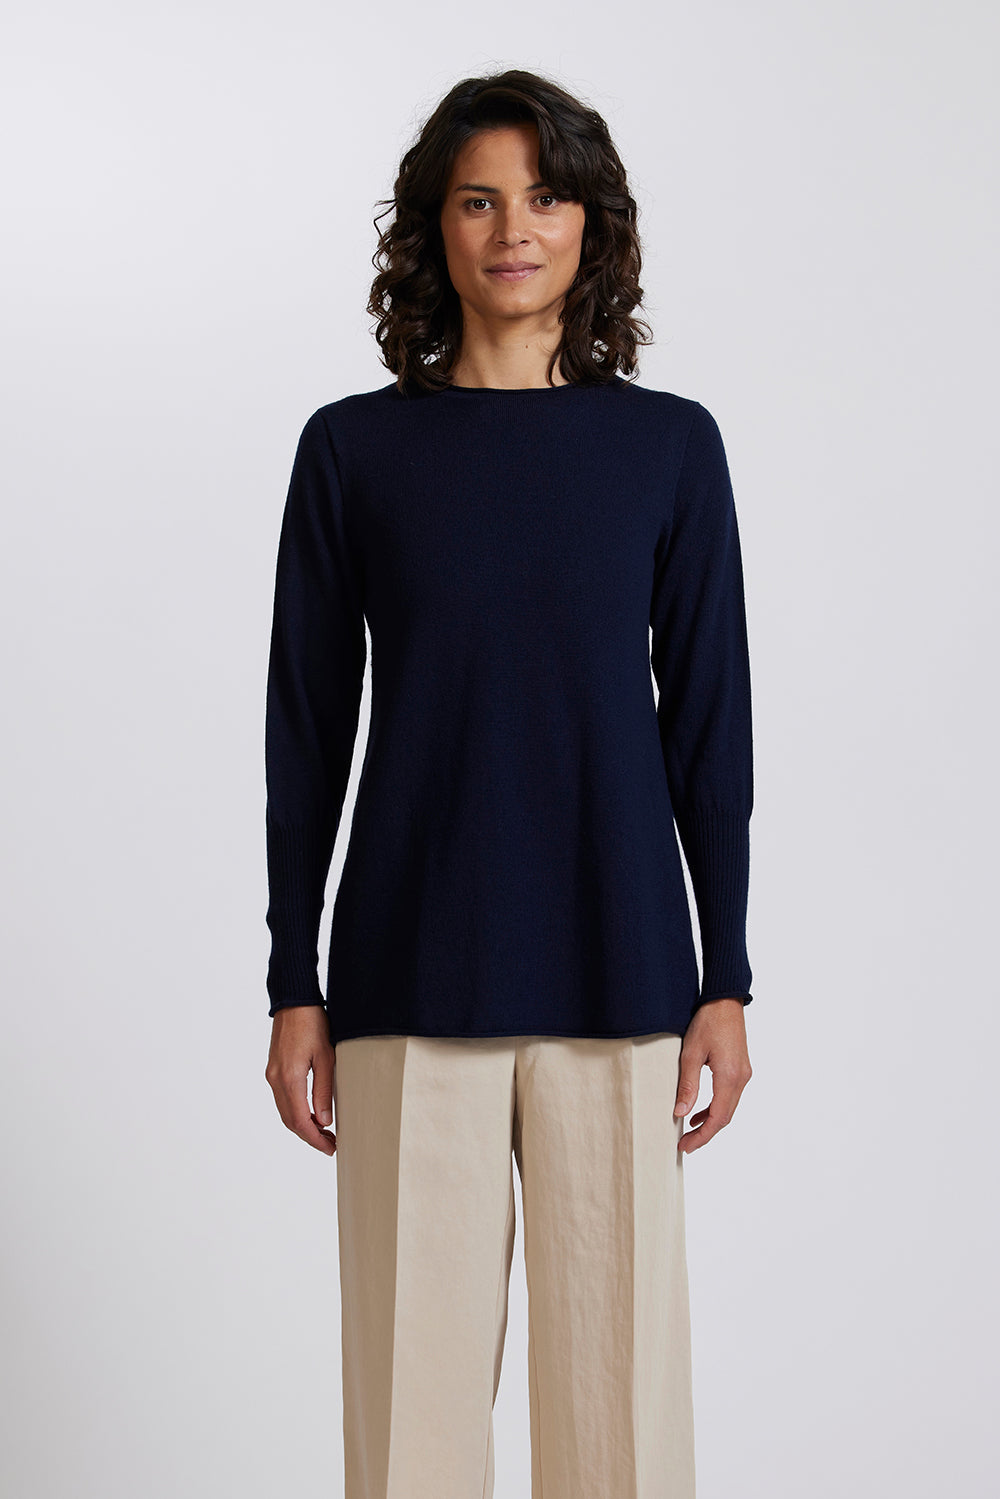 A-Line Crew Neck Sweater in Light Navy by Royal Merino